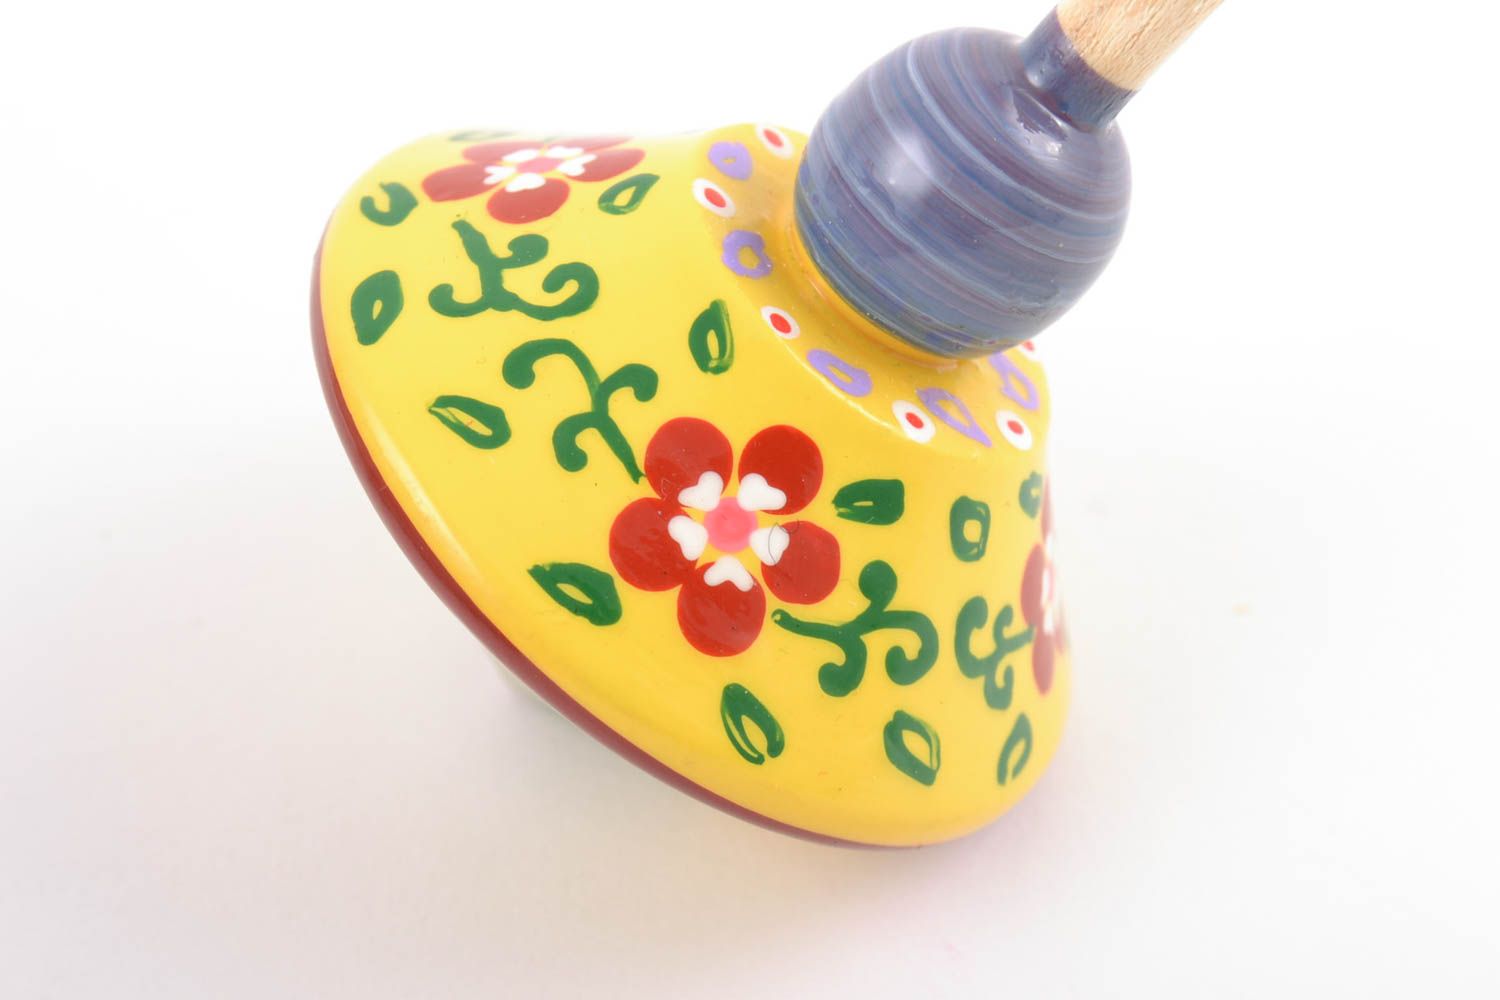 Painted handmade wooden toy spinning top educational children's toy photo 5